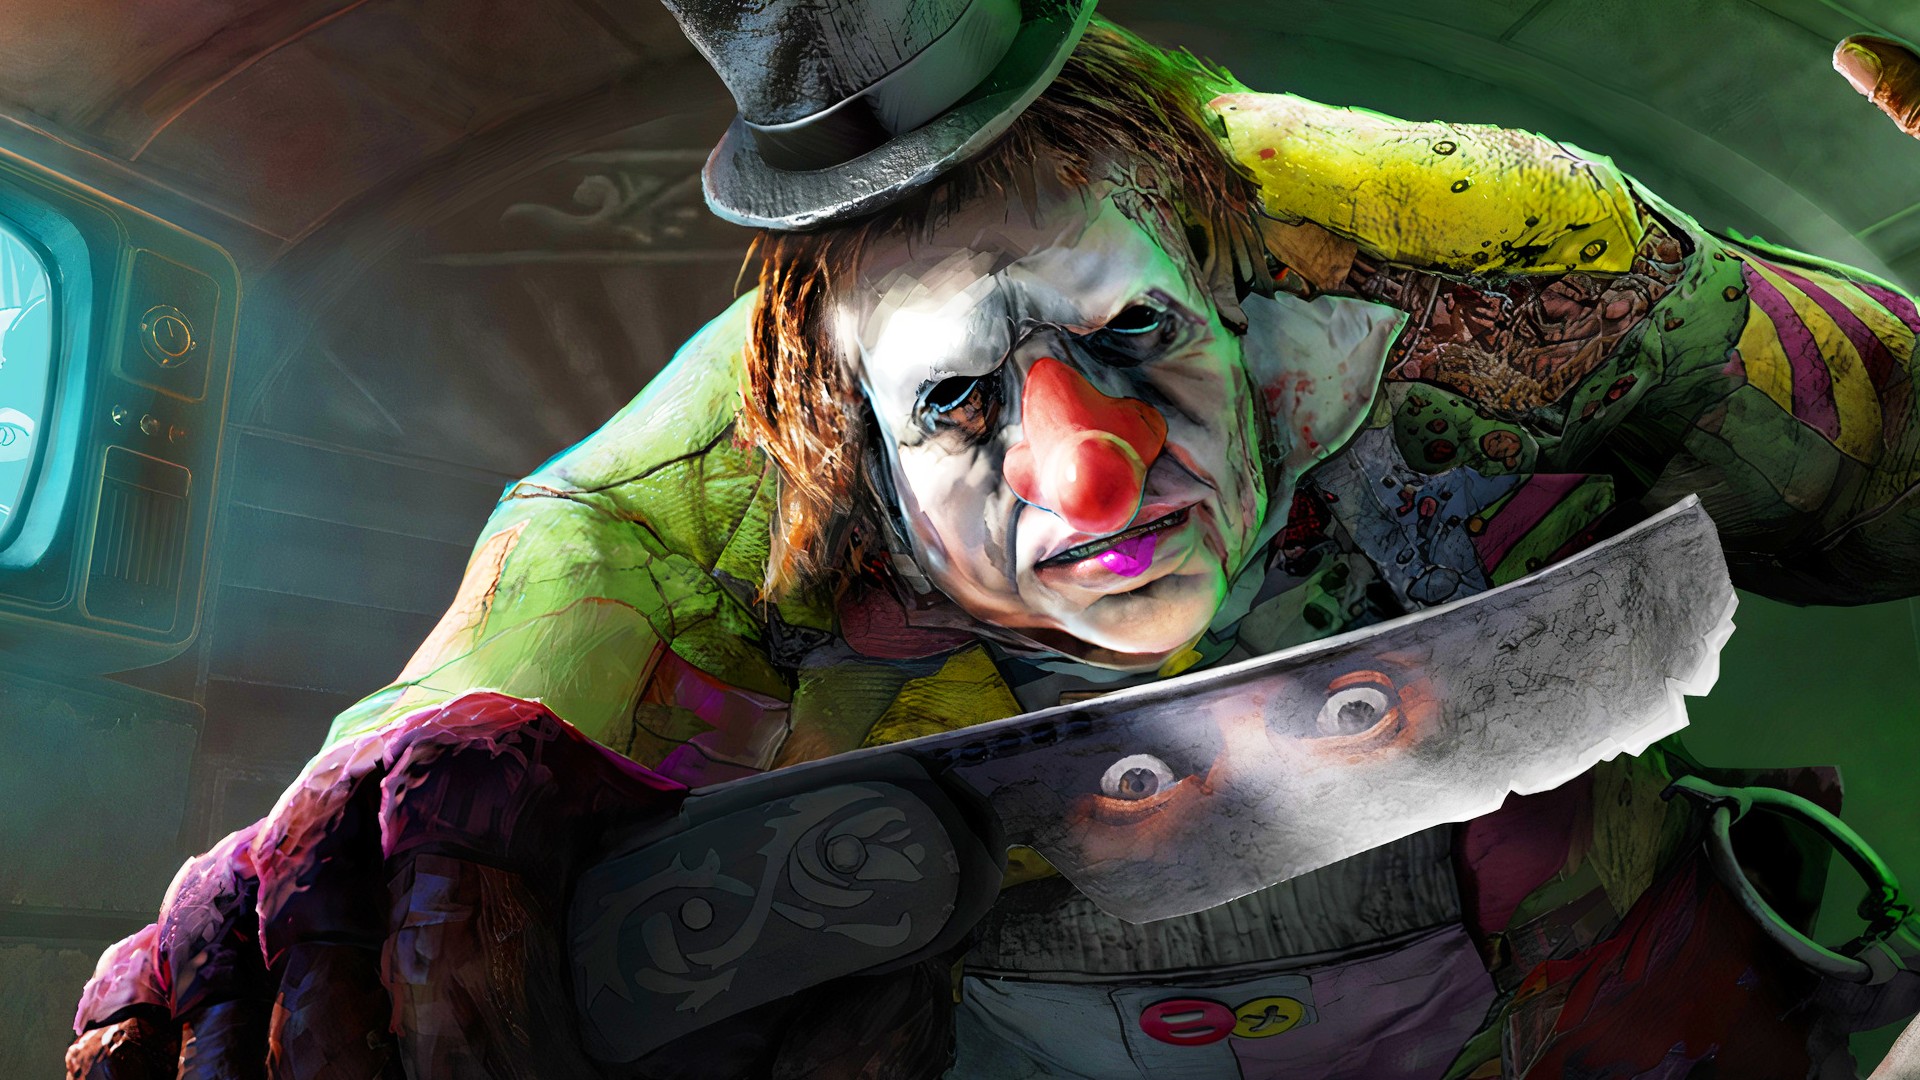 Dead by Daylight “abysmal” as Texas Chainsaw, Killer Klowns move in